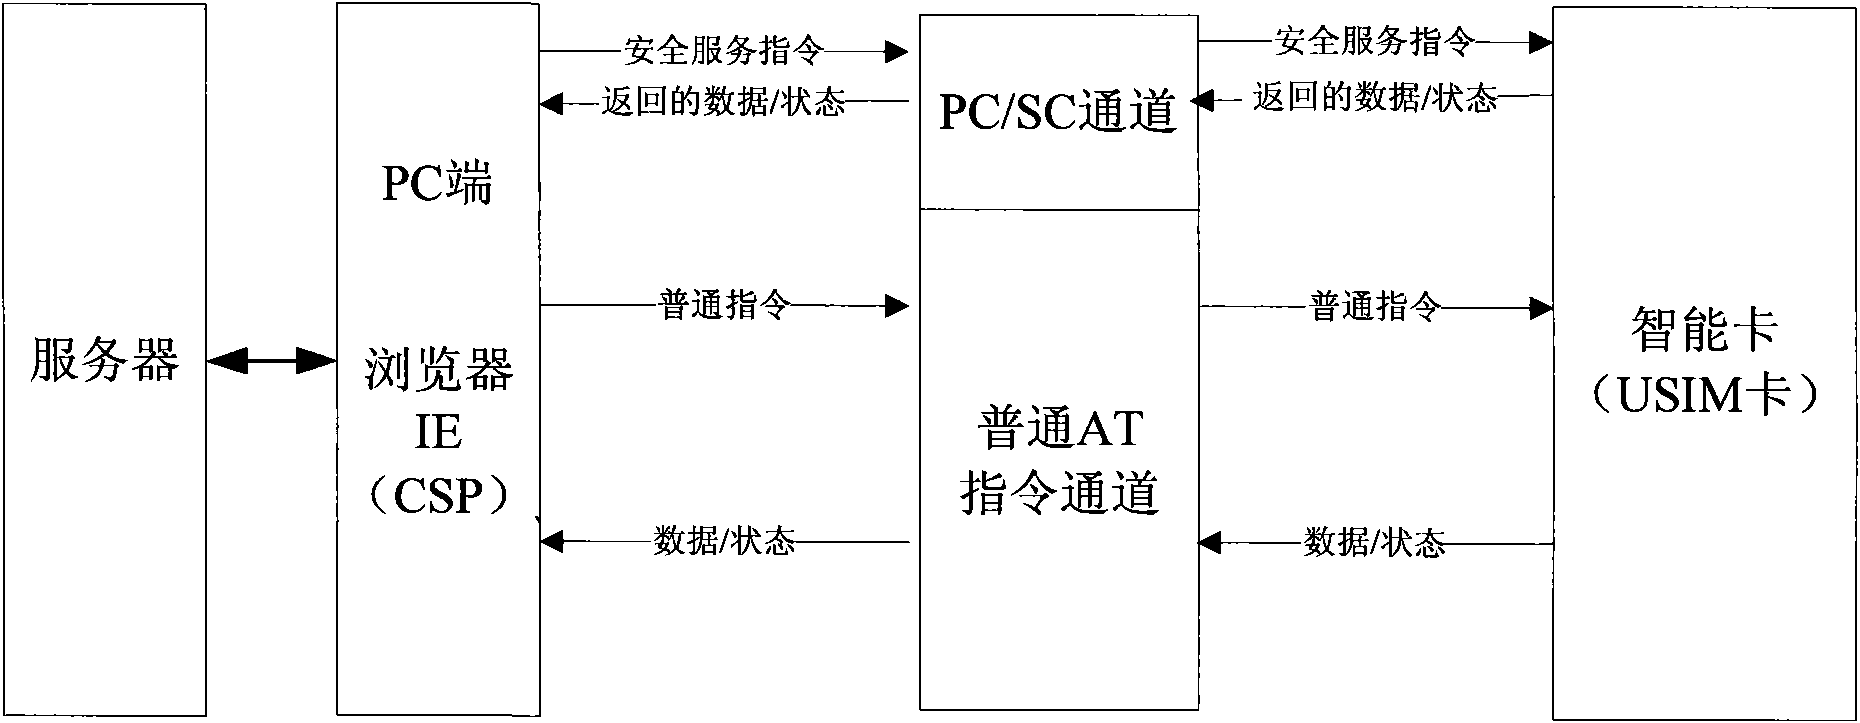 Mobile terminal signature-based remote payment system and method